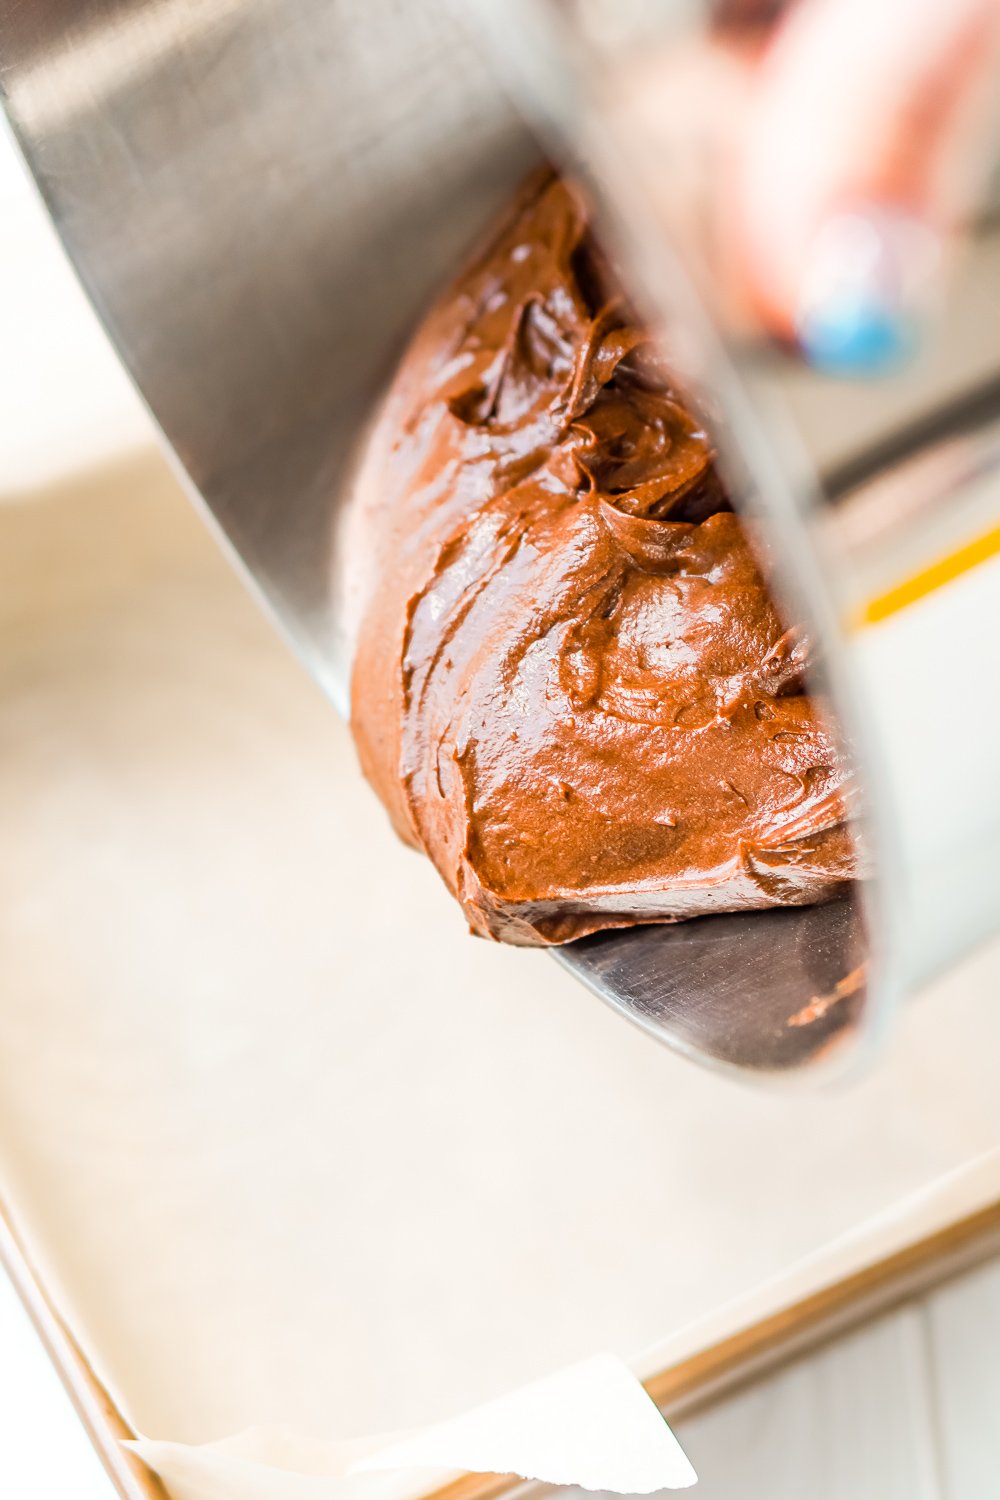 Brownie batter being poured into a baking pan